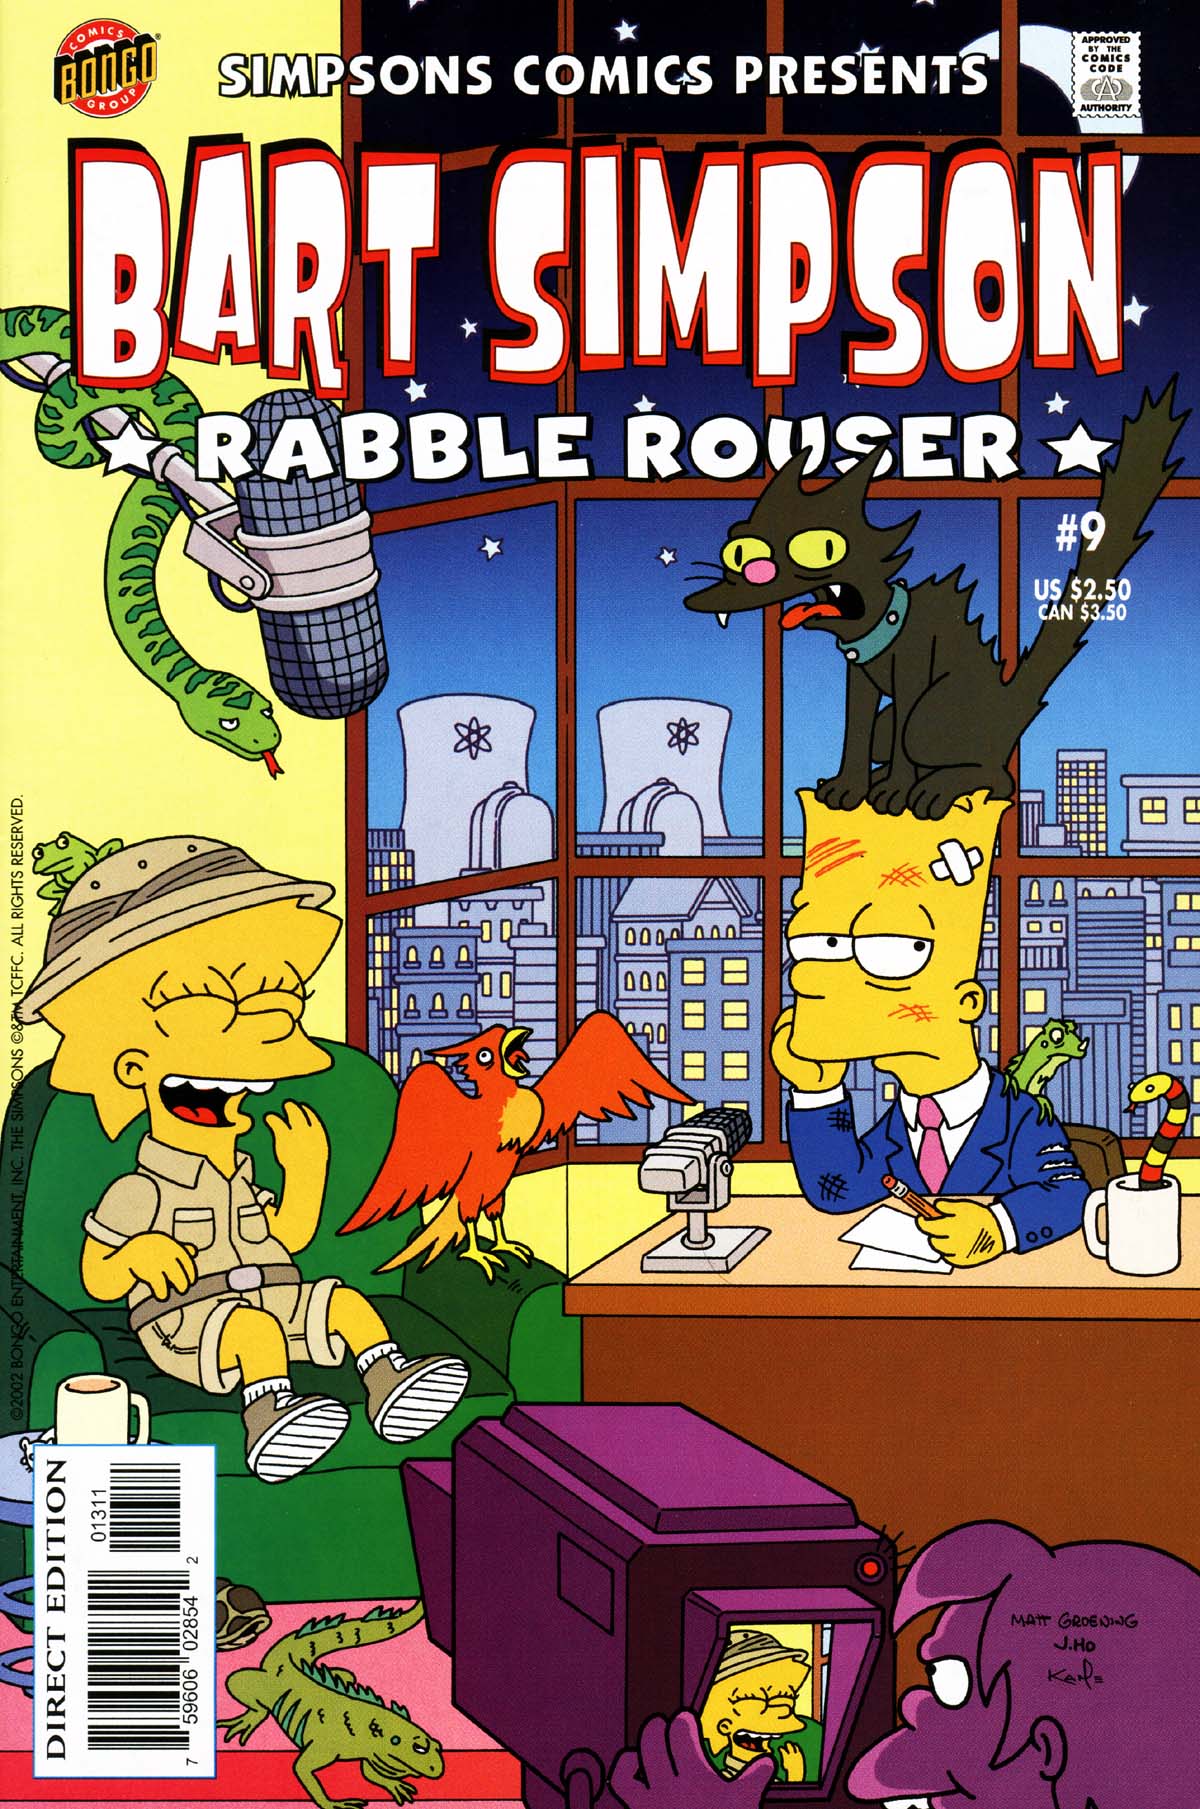 Read online Bart Simpson comic -  Issue #9 - 1